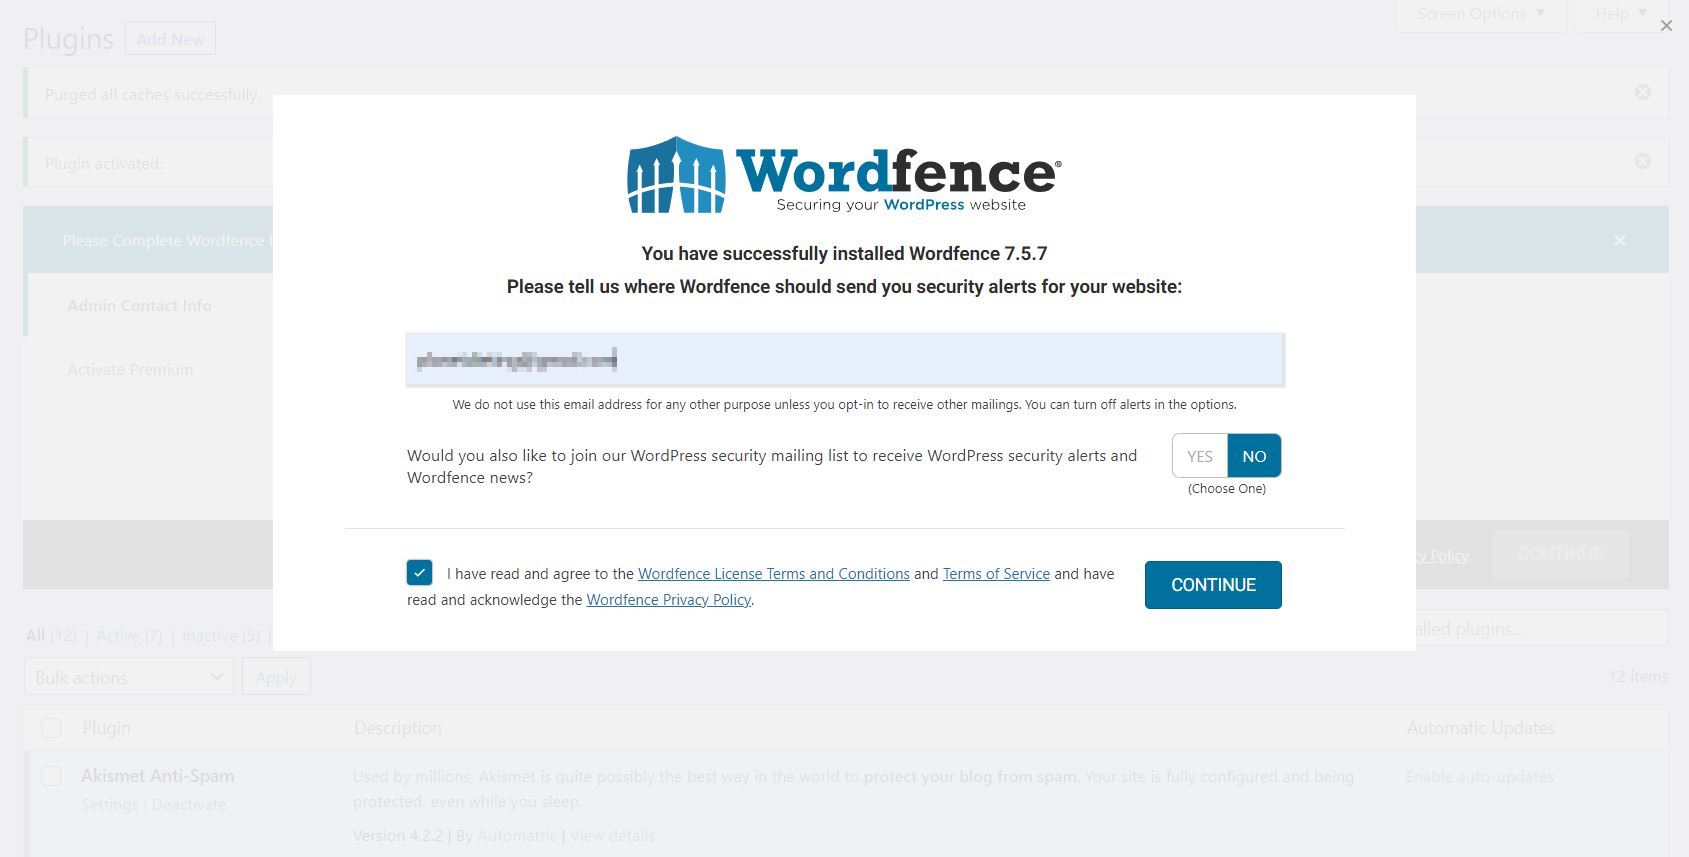 How To Install Wordfence Guide Welcome Screen - Add email completed